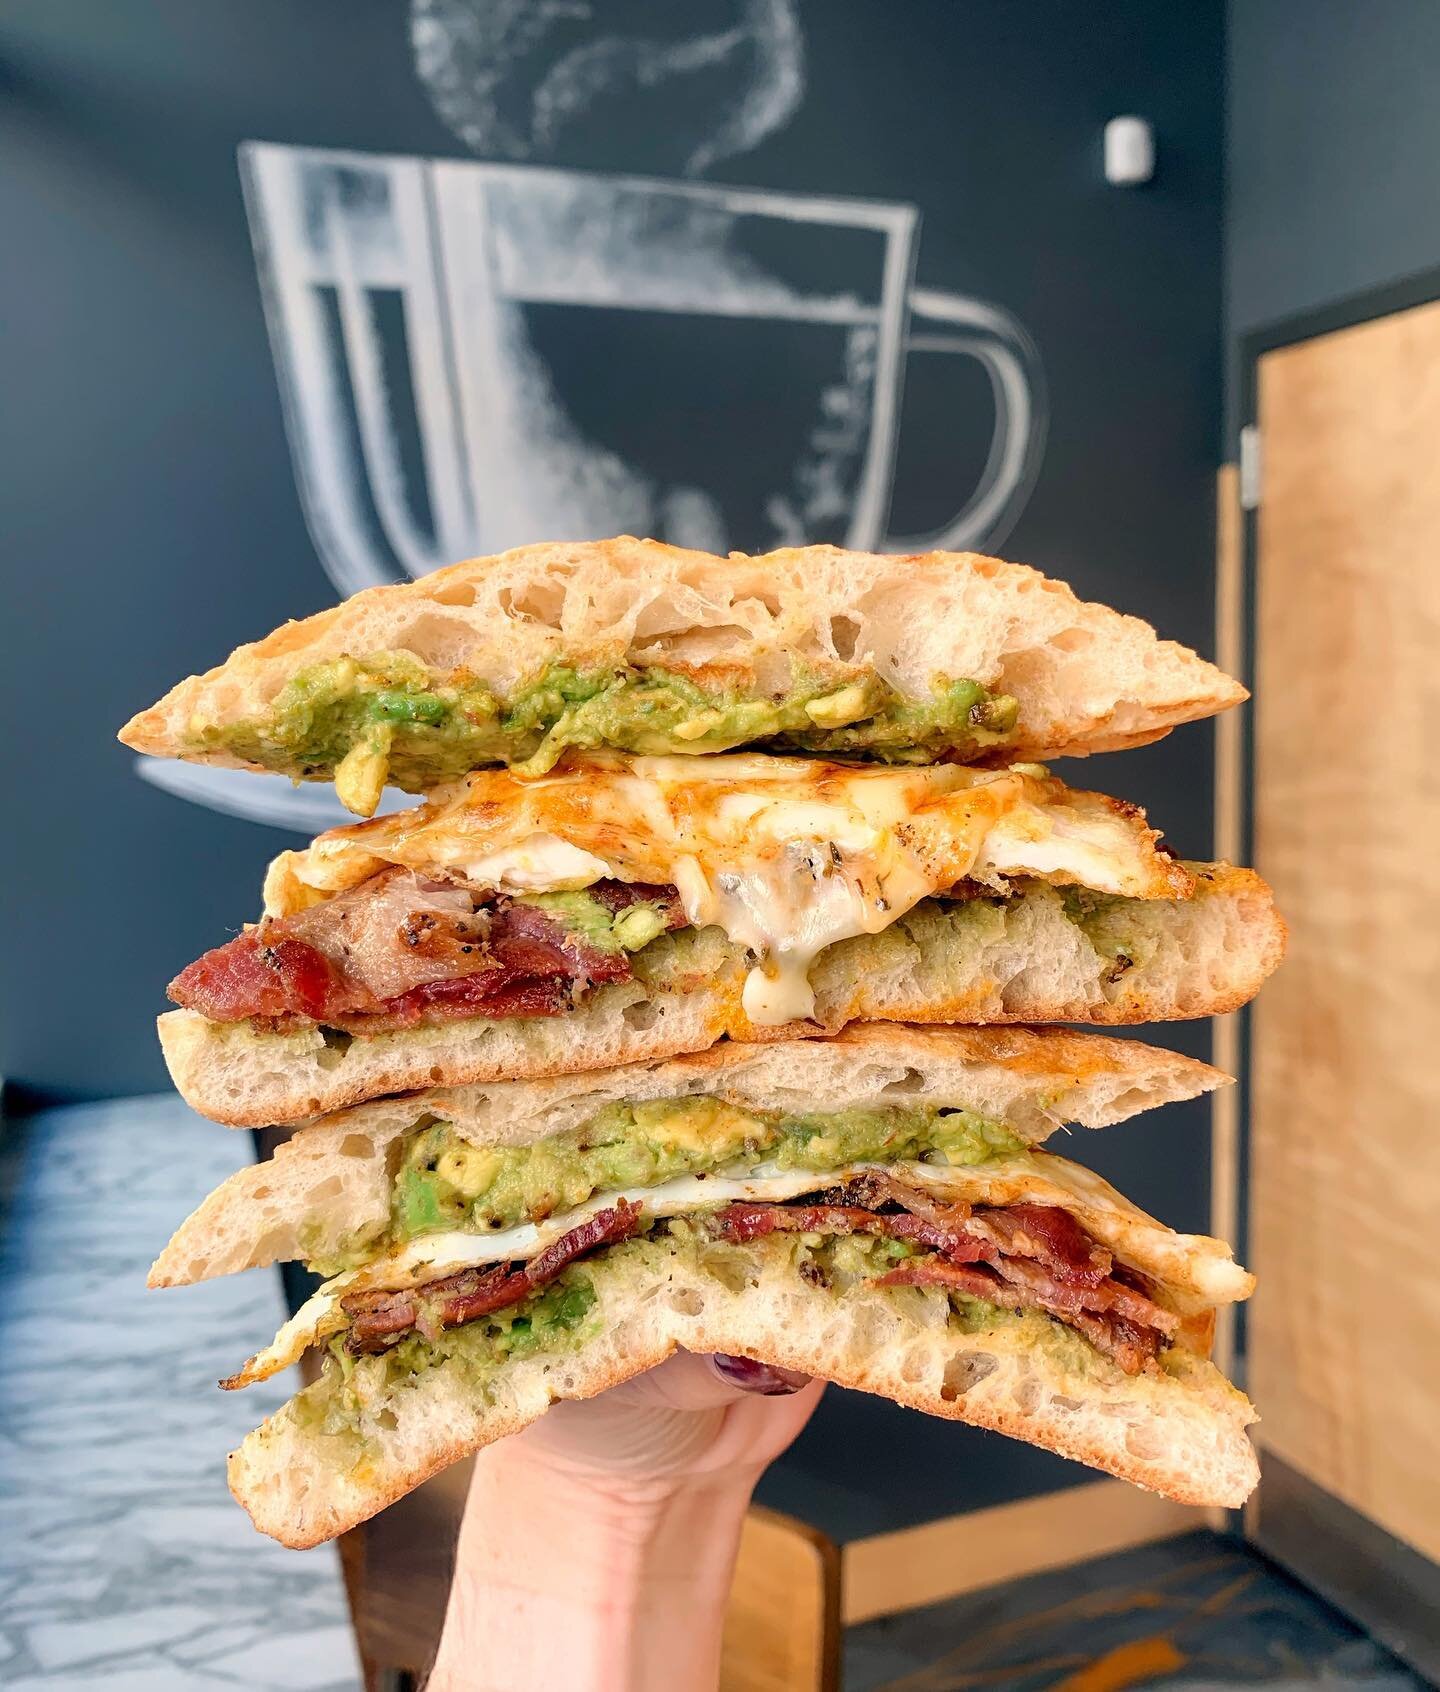 Our bacon jam sandwich is ready to start your week on the MOST delicious note!! Who's hungry?? 😋🧡